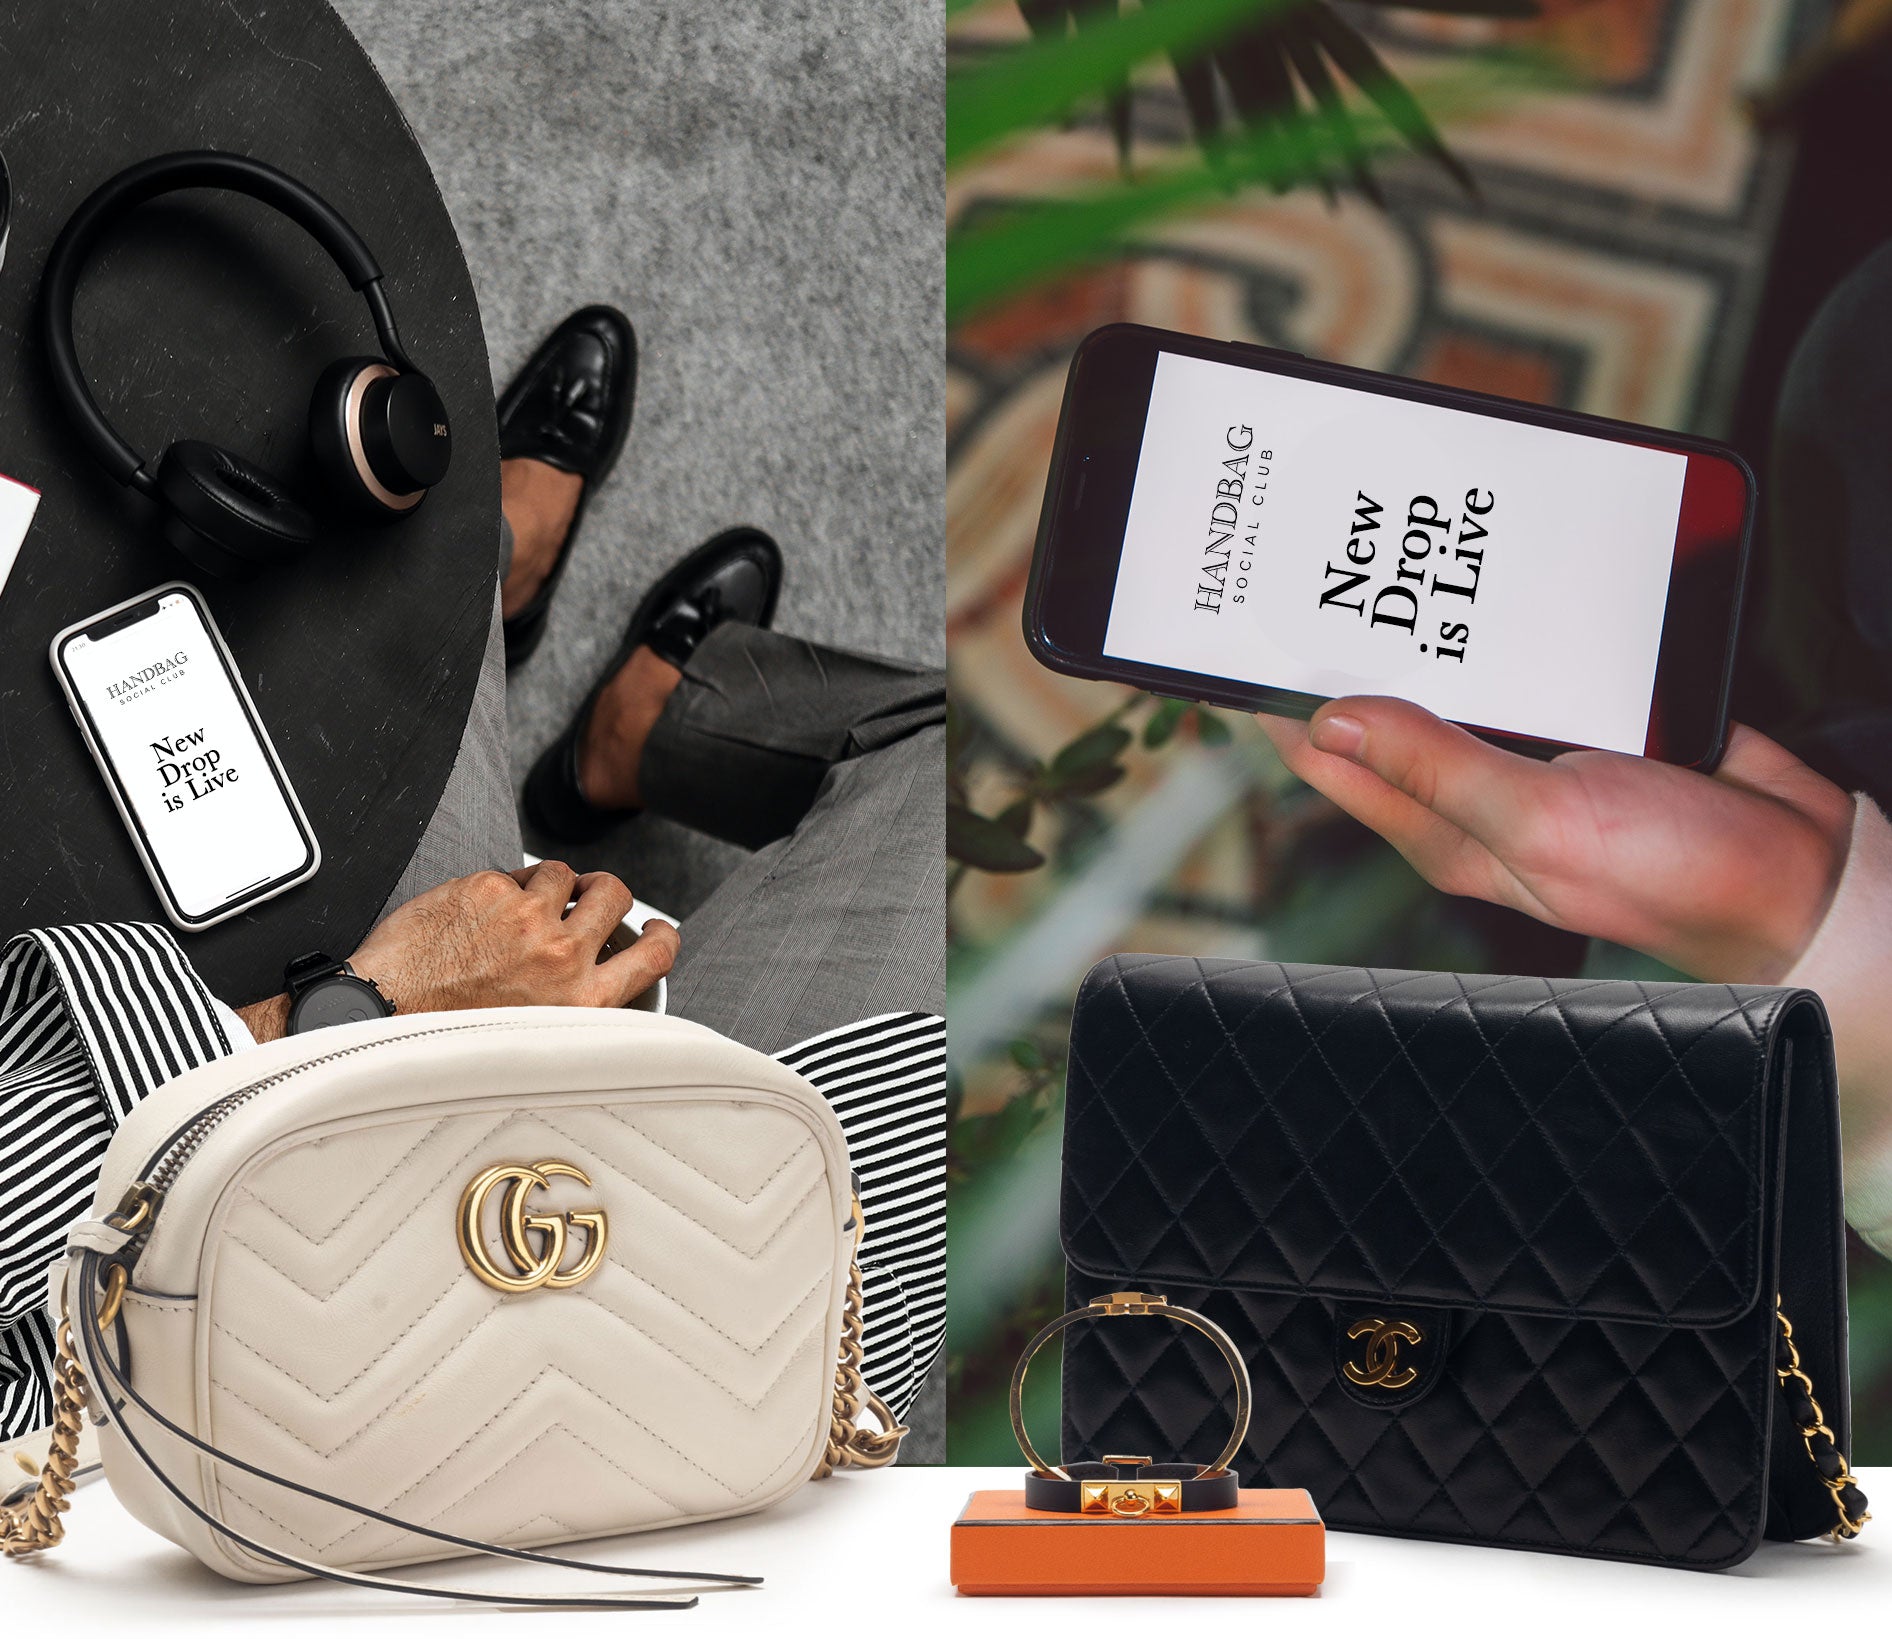 Men and woman on phones waiting for product drop, Gucci Marmont, Chanel Flat Flap, Hermes Clic H Bracelet, Hermes Rivale Mini Bracelet, Hermes Box, Chanel Box